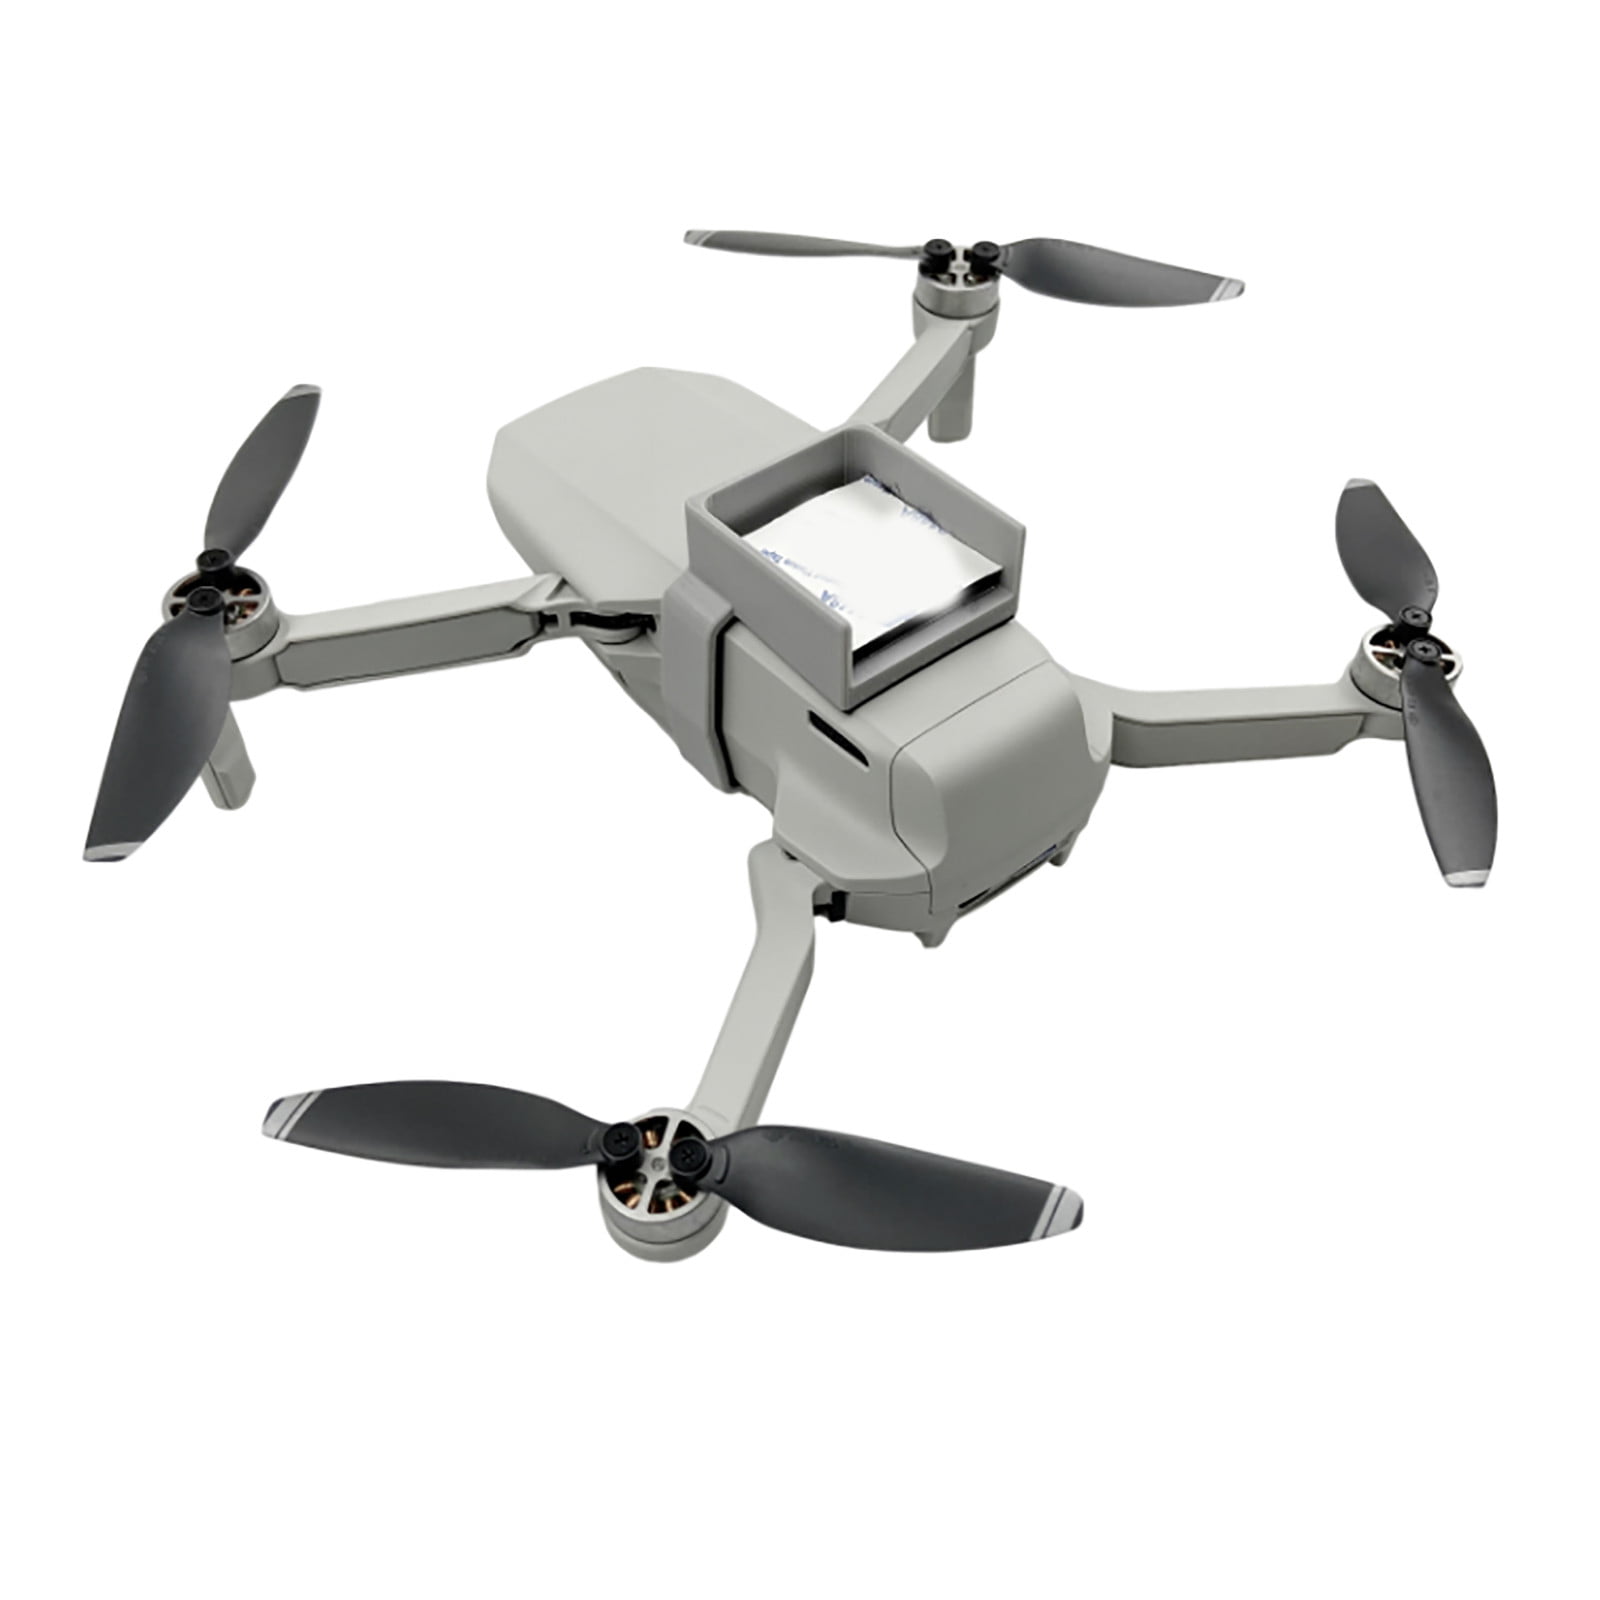 Brace Citere Anholdelse MINI Bracket Box Anti-Lost compitable with mavic Bracket Fixed GPS Top For  Loading Mounting Camera Drone Accessories - Walmart.com